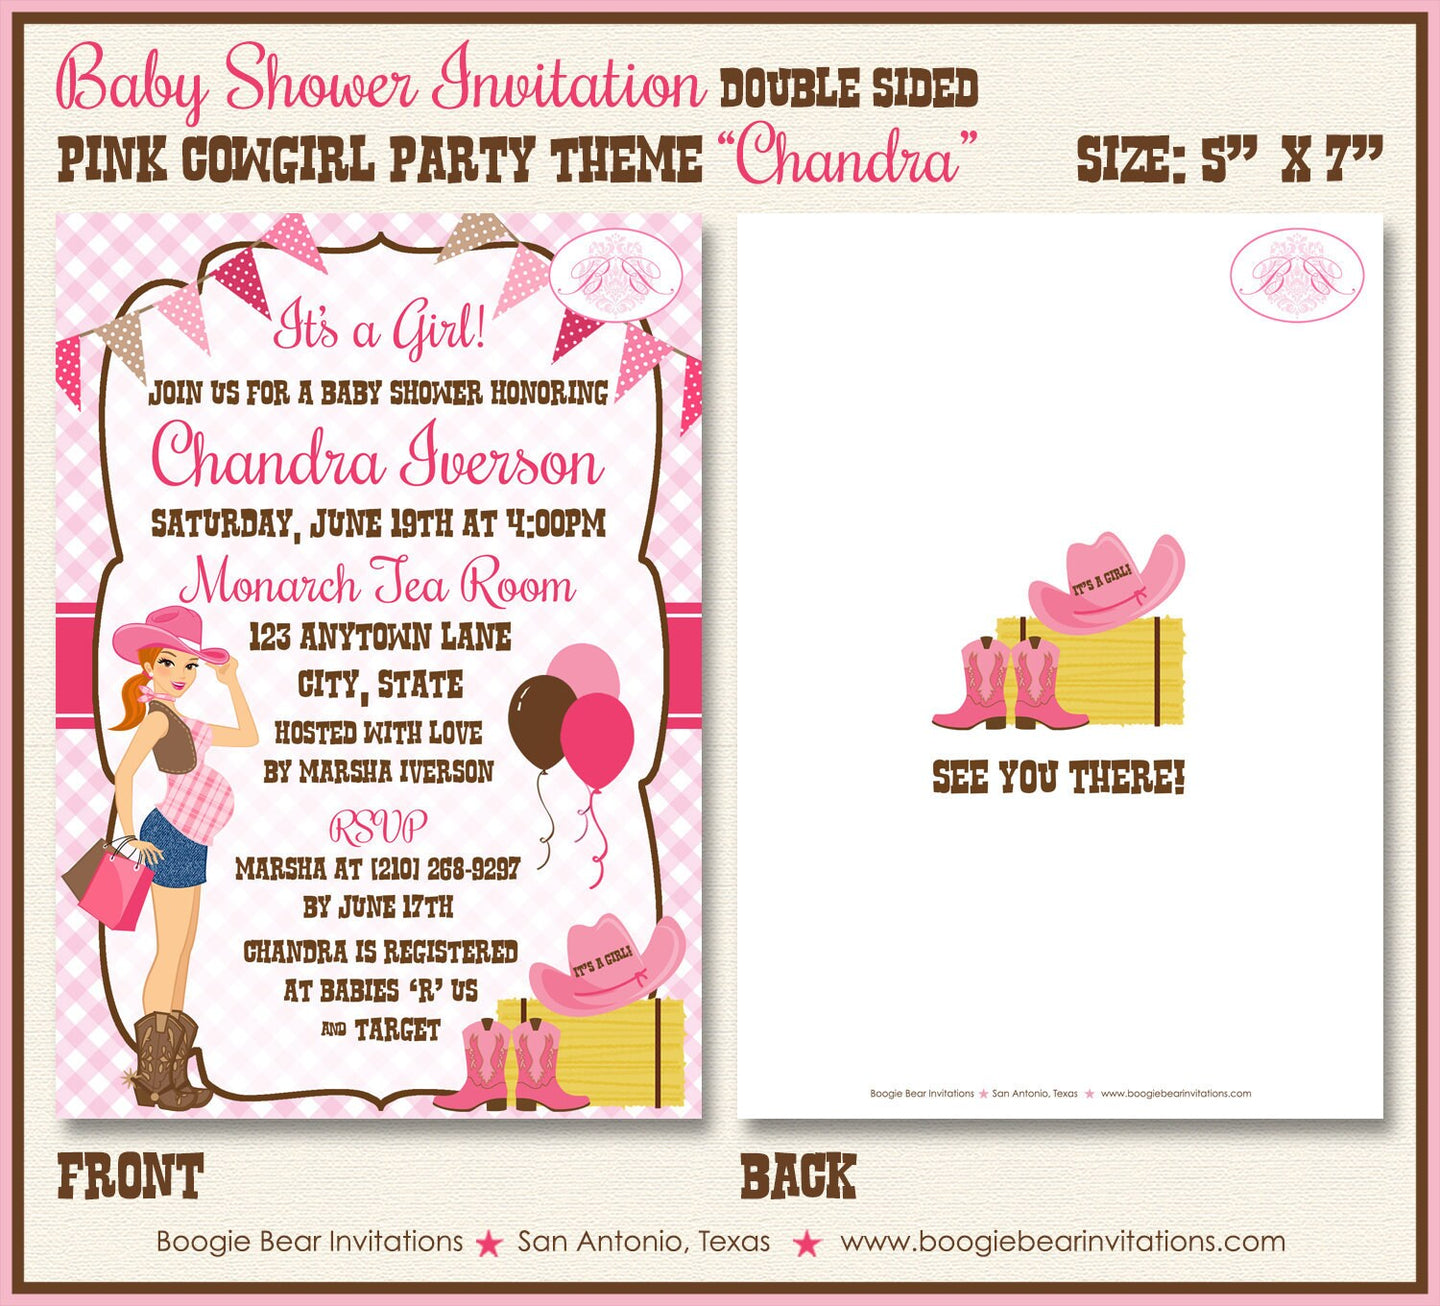 Cowgirl Pink Baby Shower Invitation Girl Modern Chic Magenta Bright Soft Boogie Bear Invitations Chandra Theme Paperless Printable Printed